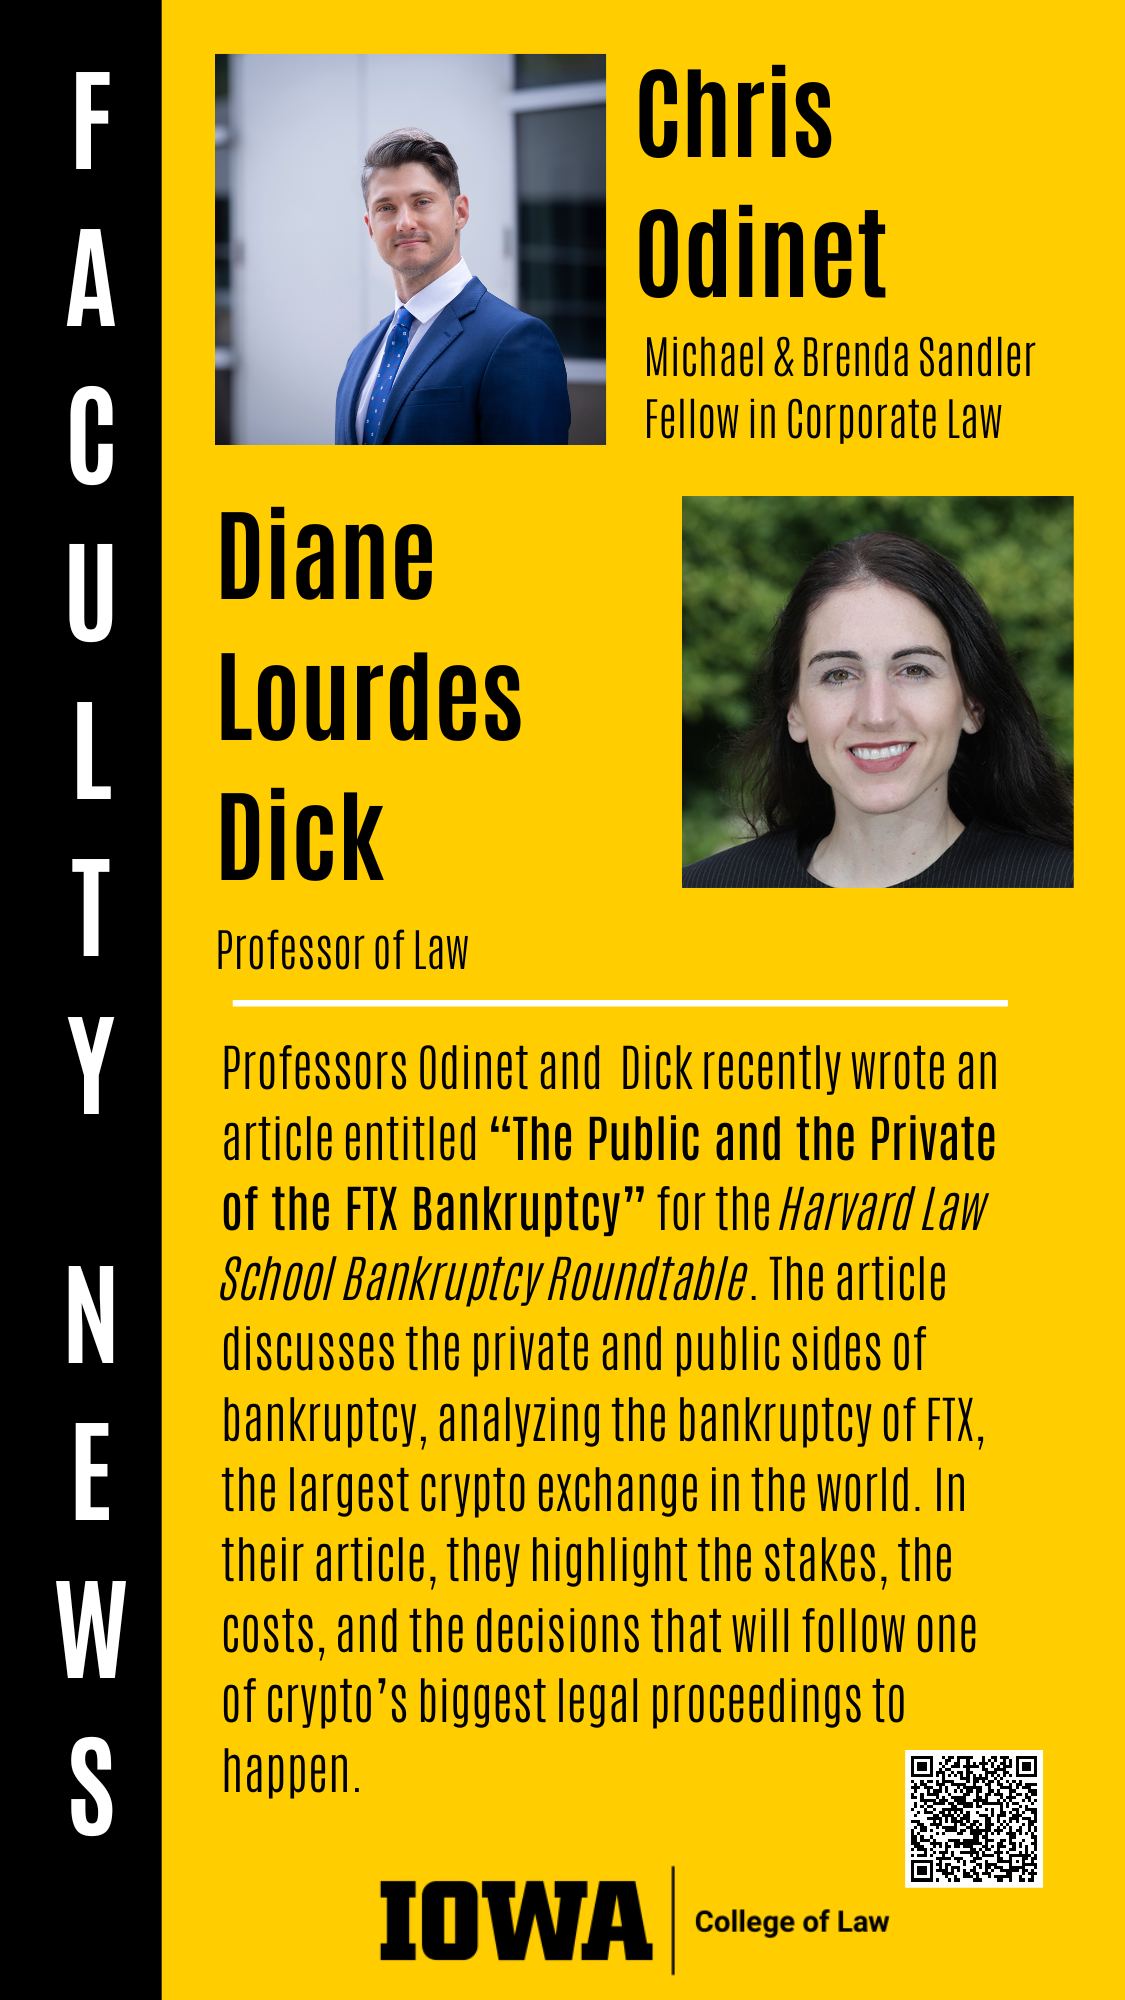 Chris Odinet and Diane Lourdes Dick. Professors Odinet and  Dick recently wrote an article entitled “The Public and the Private of the FTX Bankruptcy” for the Harvard Law School Bankruptcy Roundtable. The article discusses the private and public sides of bankruptcy, analyzing the bankruptcy of FTX, the largest crypto exchange in the world. In their article, they highlight the stakes, the costs, and the decisions that will follow one of crypto’s biggest legal proceedings to happen. 